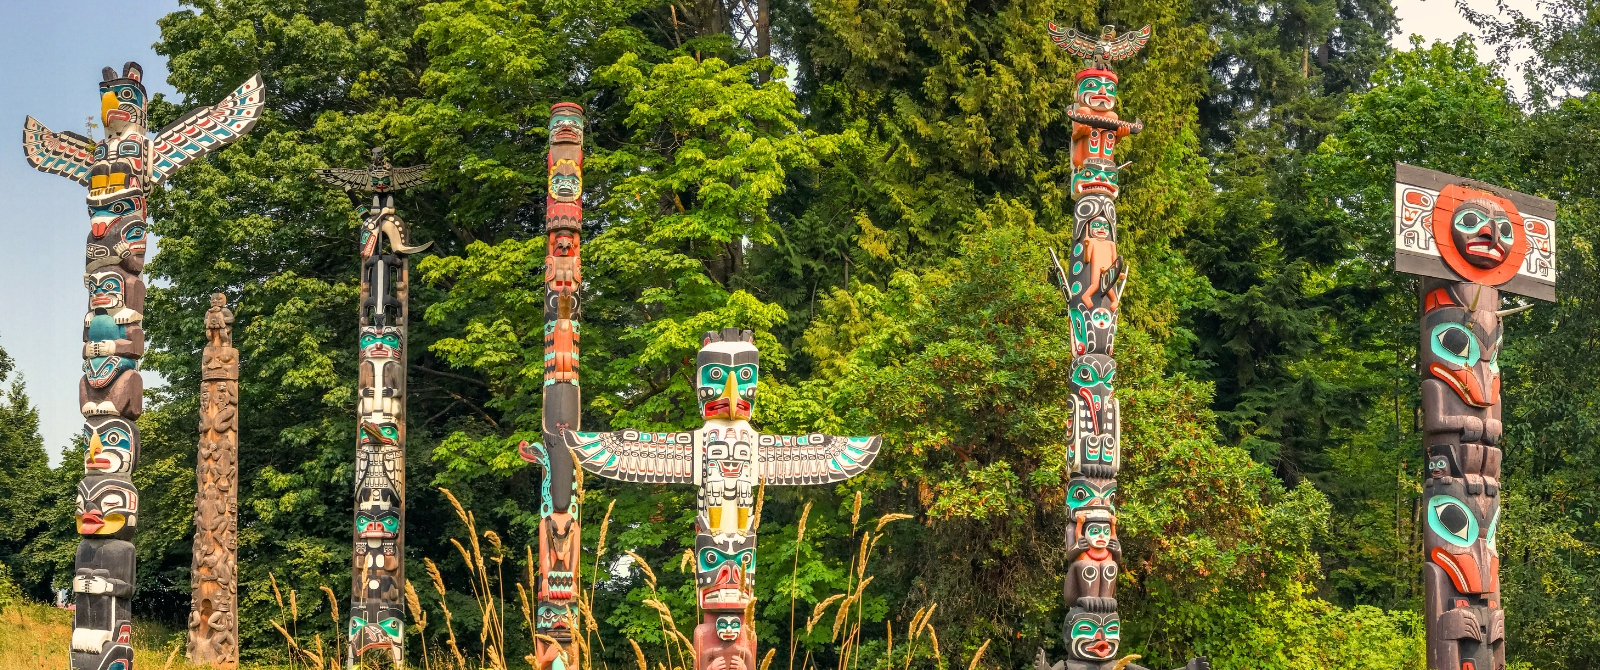 Totems in Stanley Park